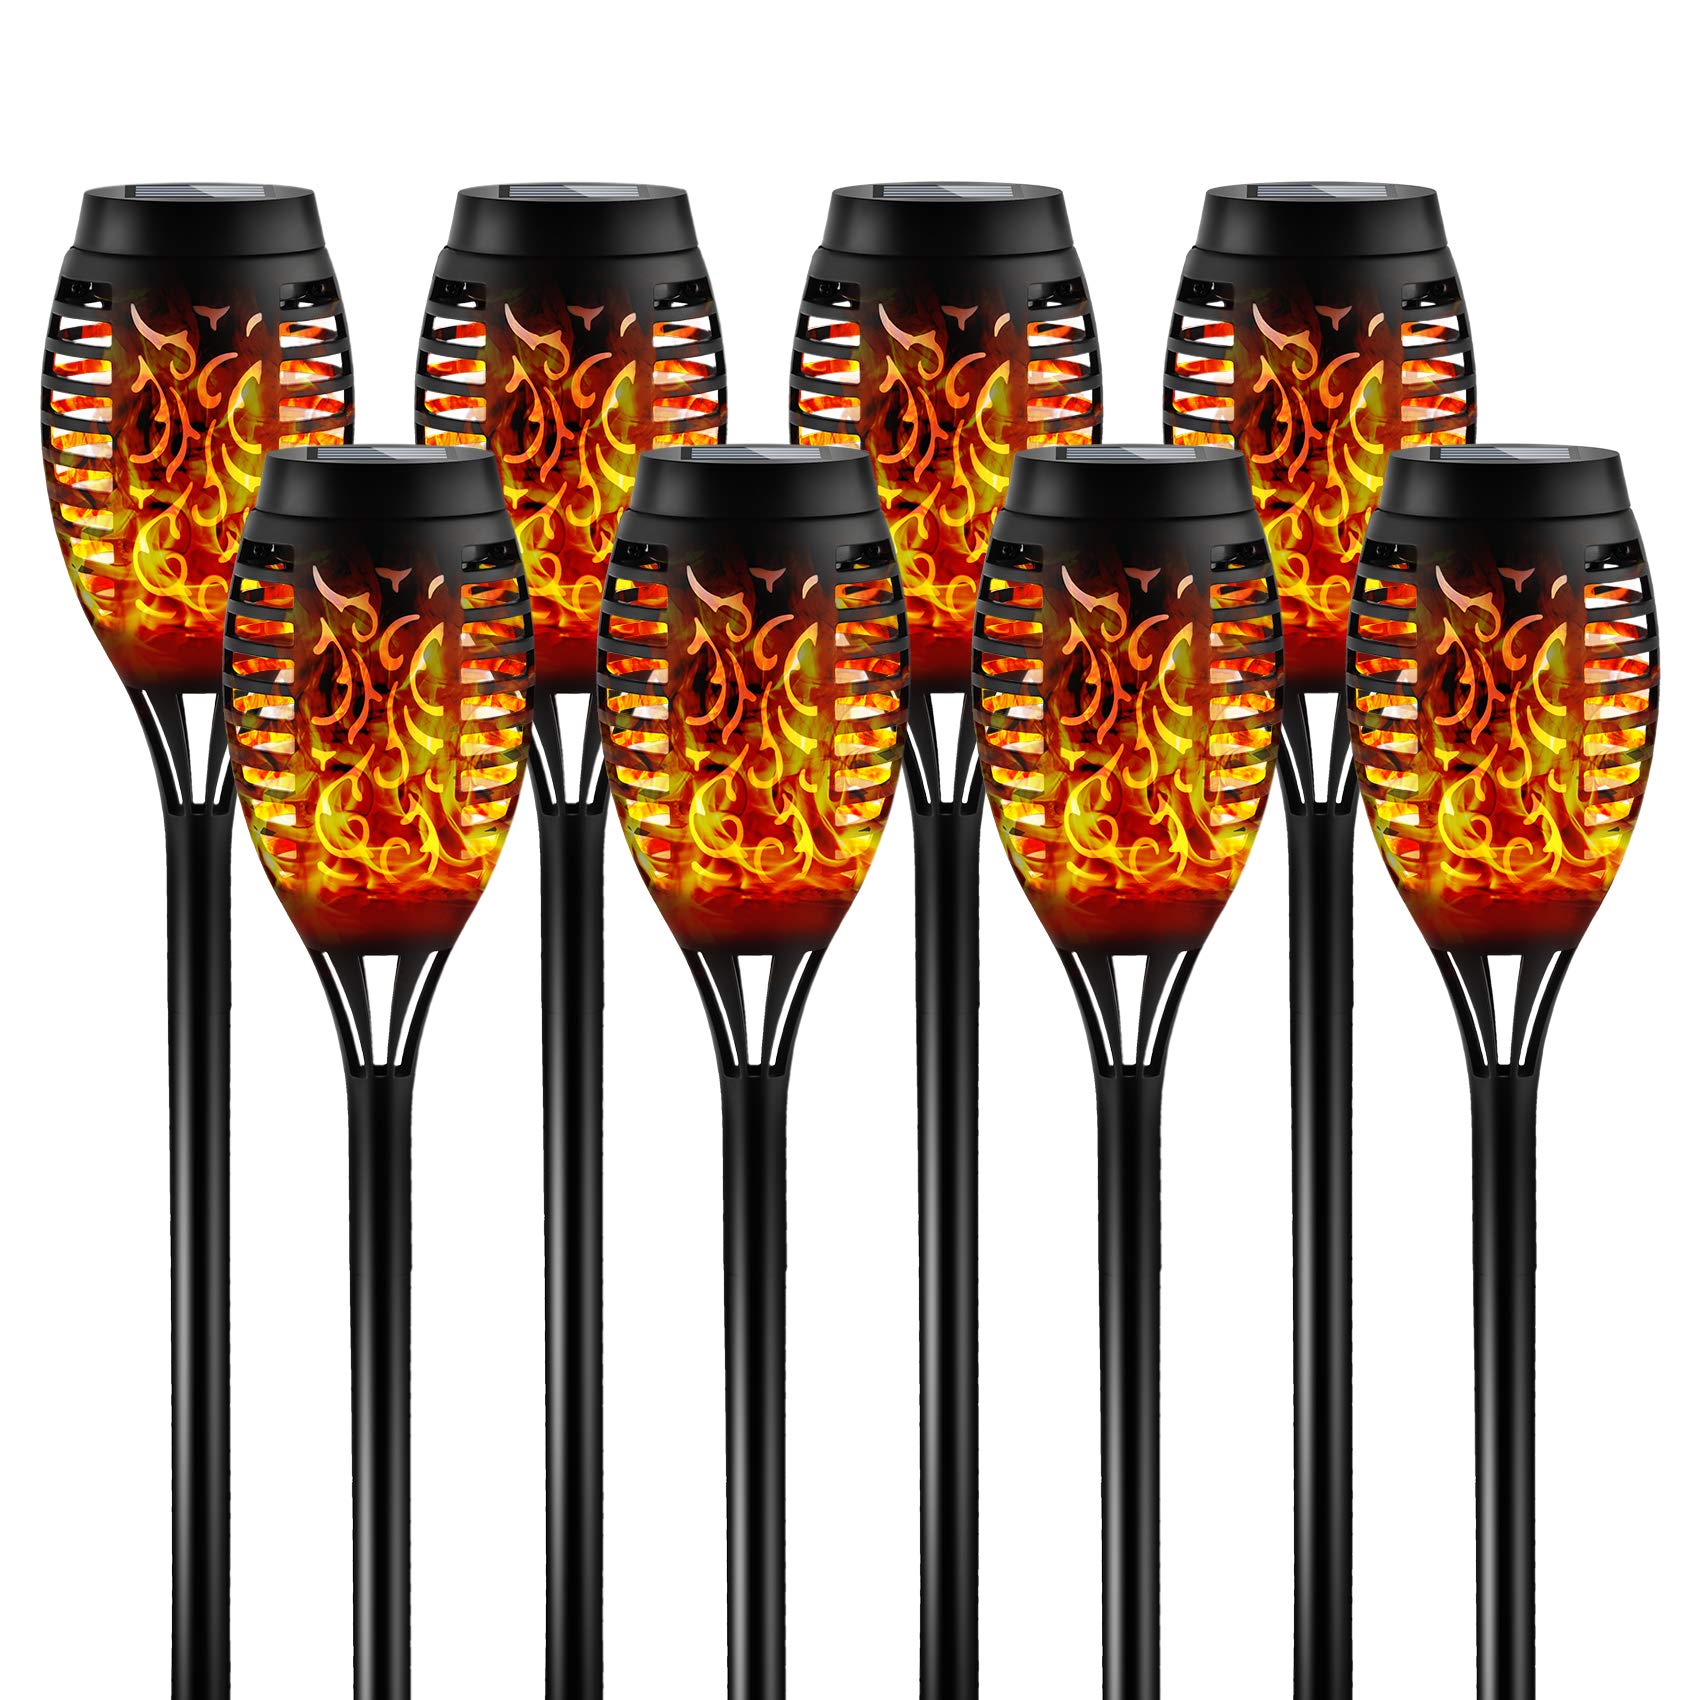 Otdair Solar Torch Lights with Flickering Flame